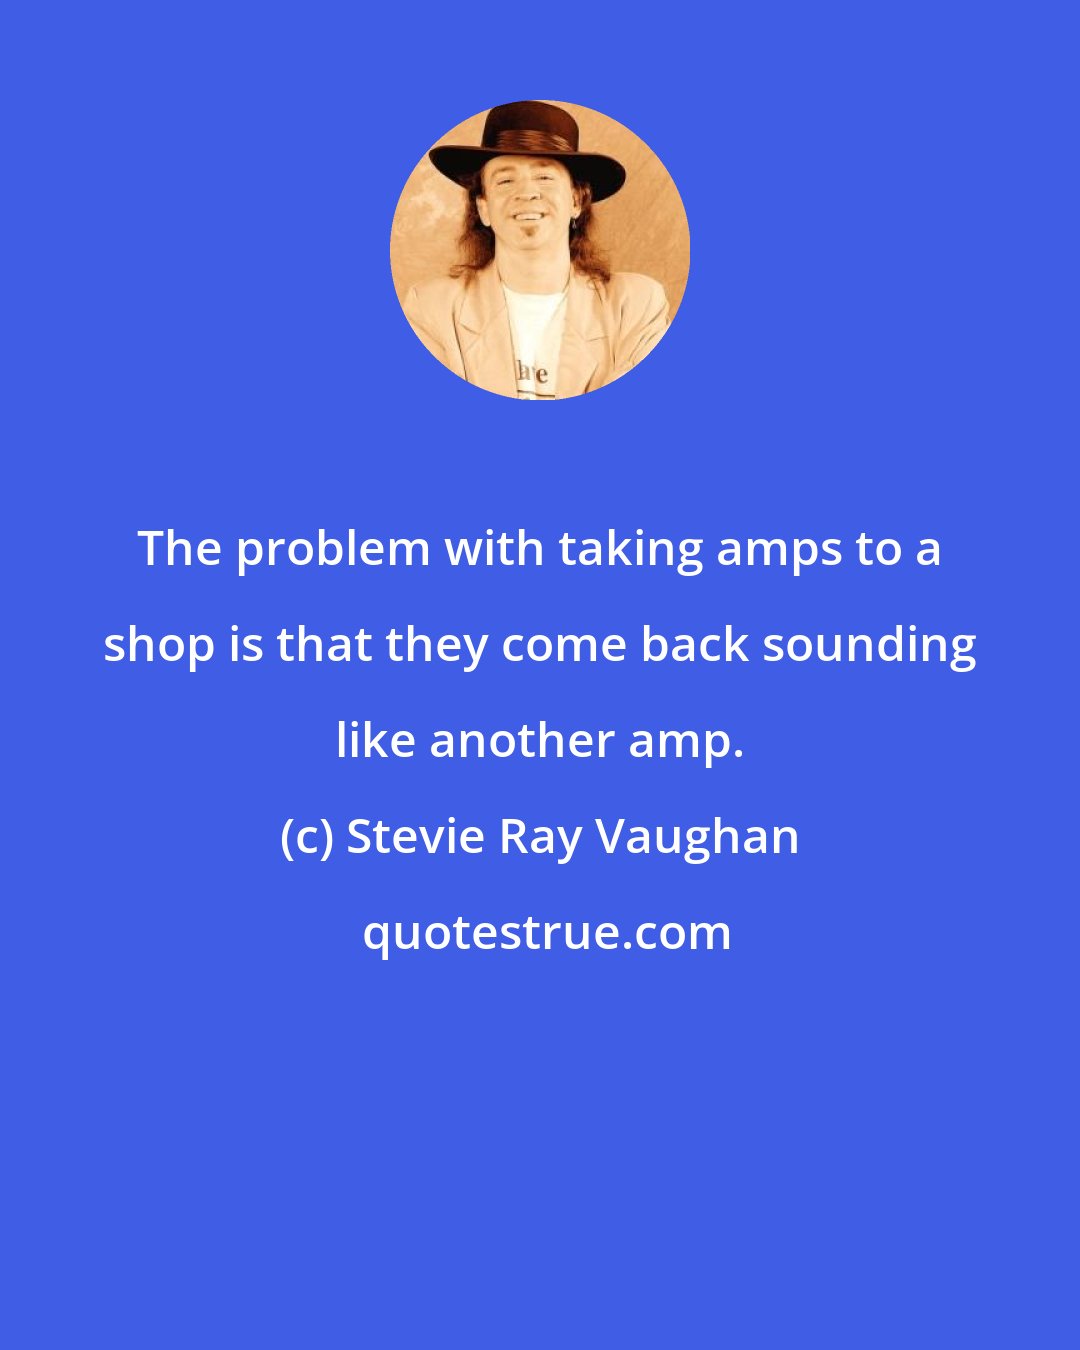 Stevie Ray Vaughan: The problem with taking amps to a shop is that they come back sounding like another amp.